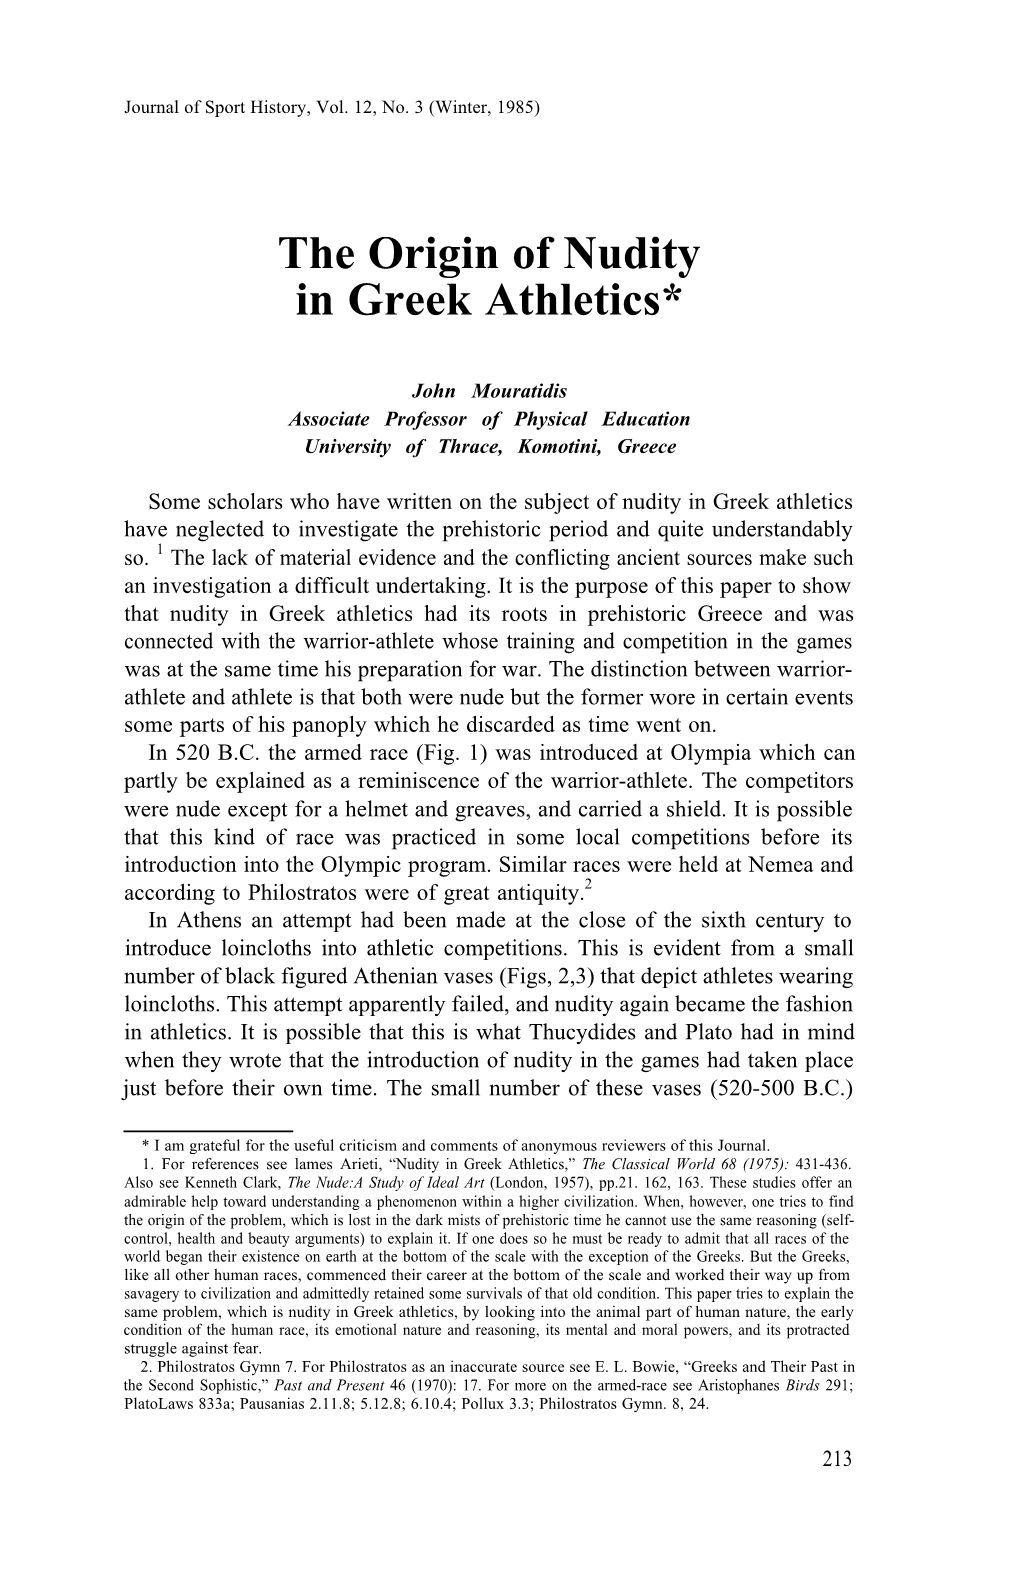 The Origin of Nudity in Greek Athletics. Mycenaean and Geometric Greek Art Clearly Show That Games in Honour of Dead Heroes Were a Common Practice Among the Greeks